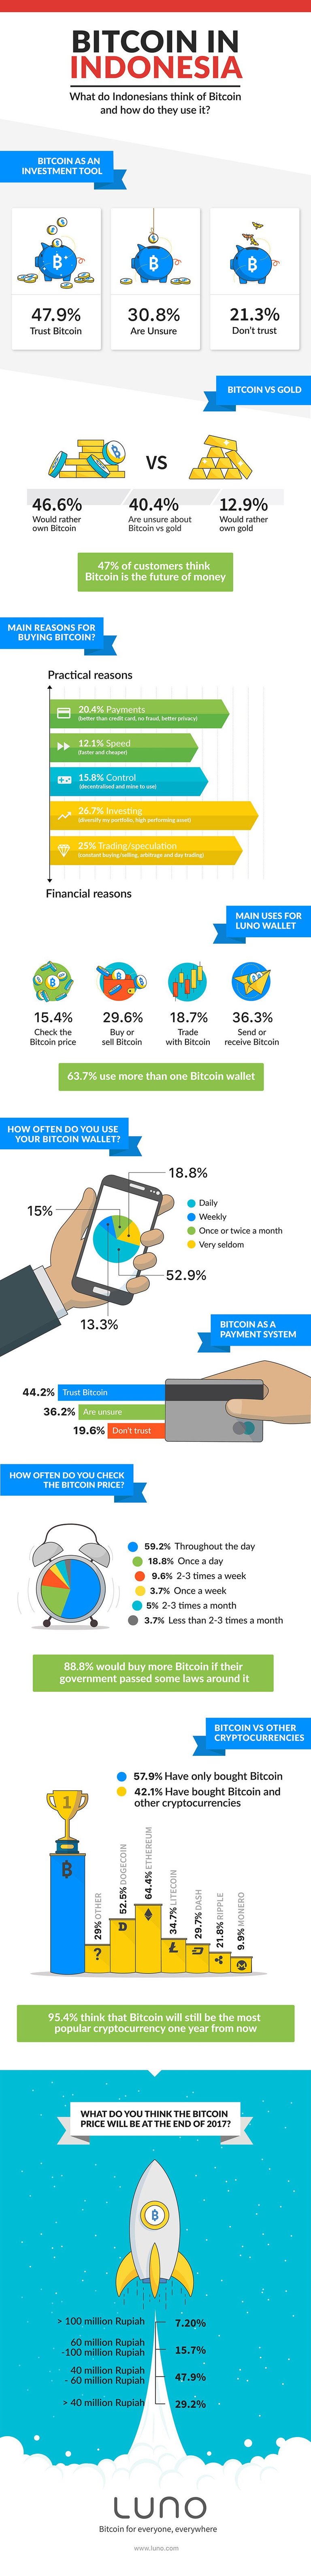 How-Indonesians-use-Bitcoin_infographic.jpg